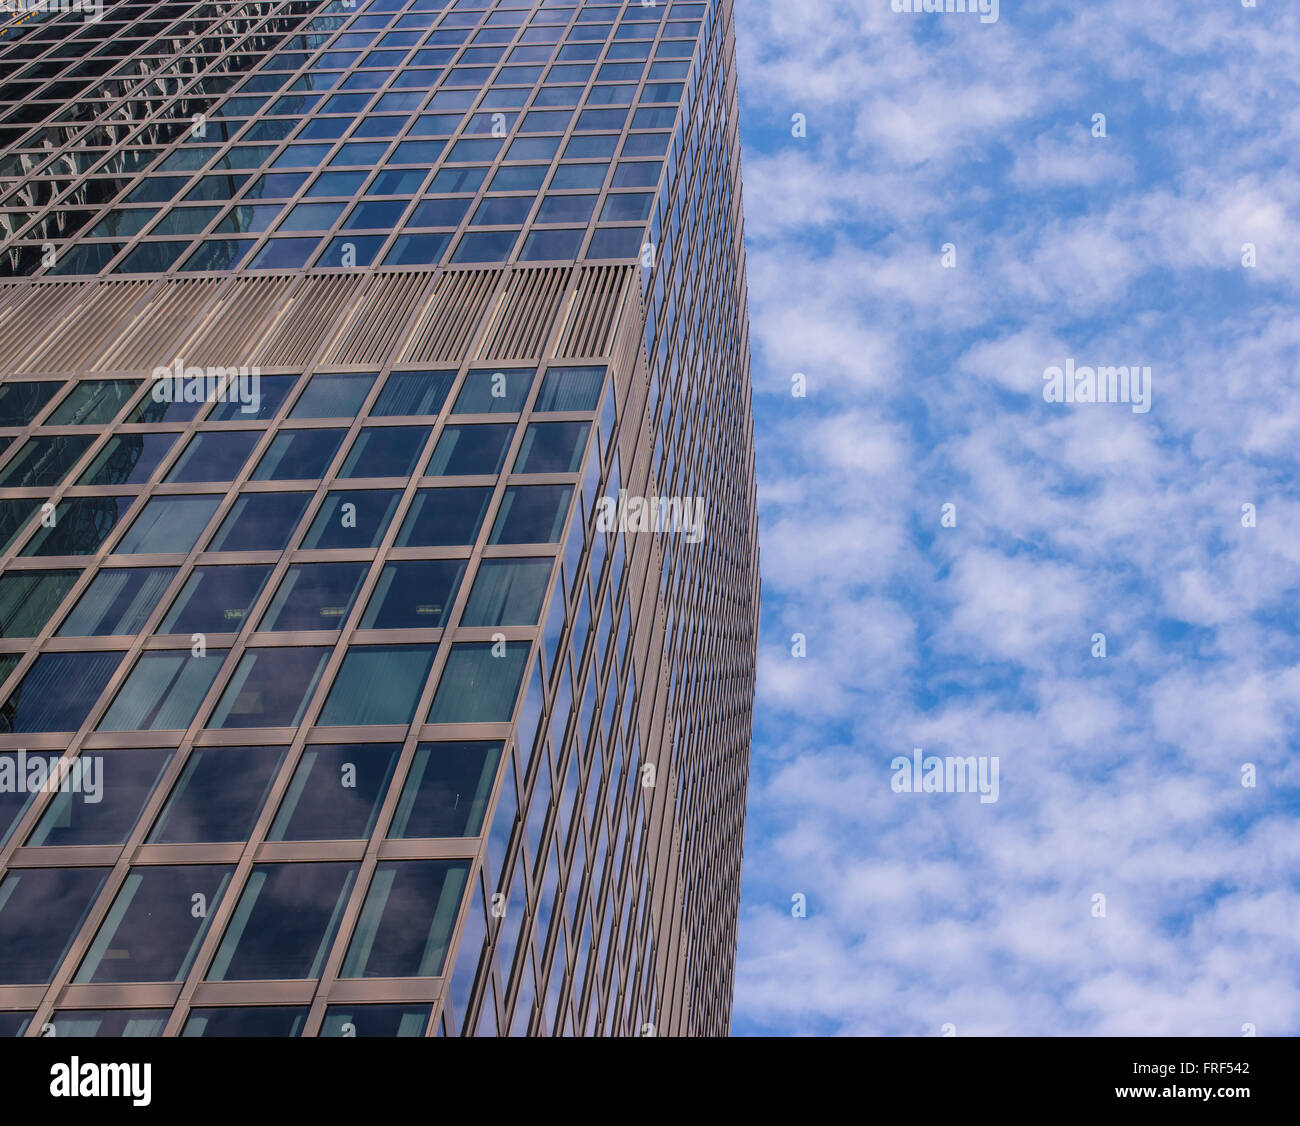 Facade of glass modern skyscraper with blue sky and white clouds in the background. Shot from below. Stock Photo